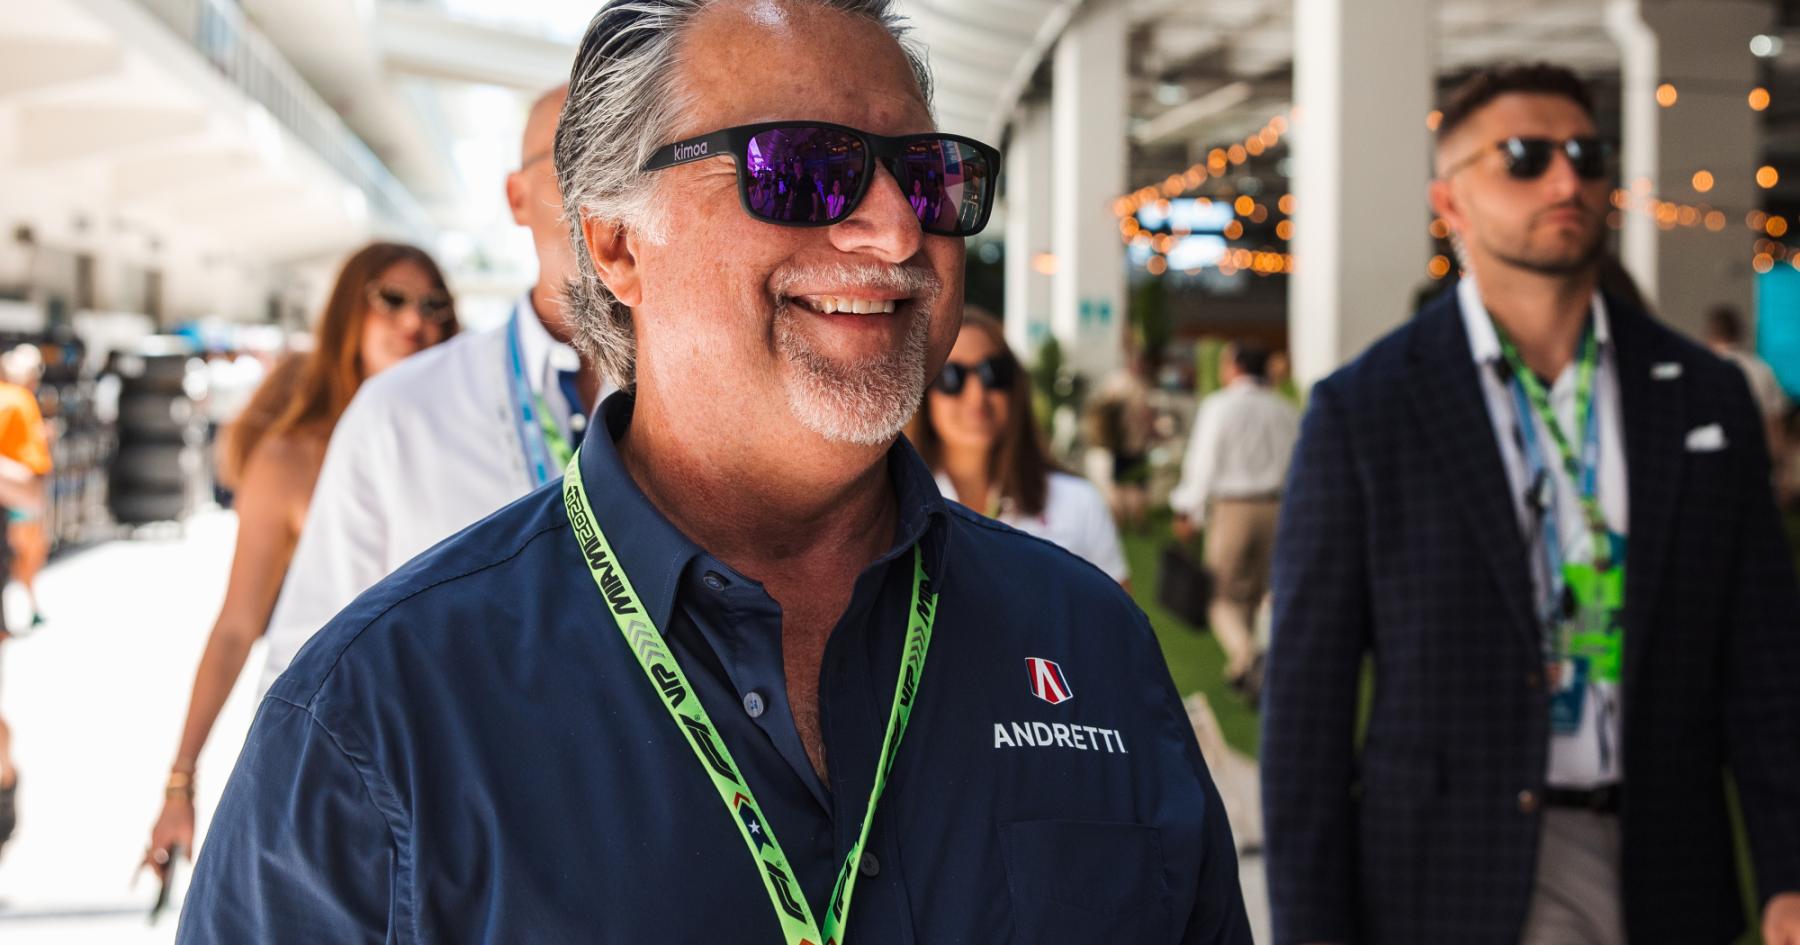 Racing Royalty: Andretti Positioned to Challenge Elite in F1 from the Start